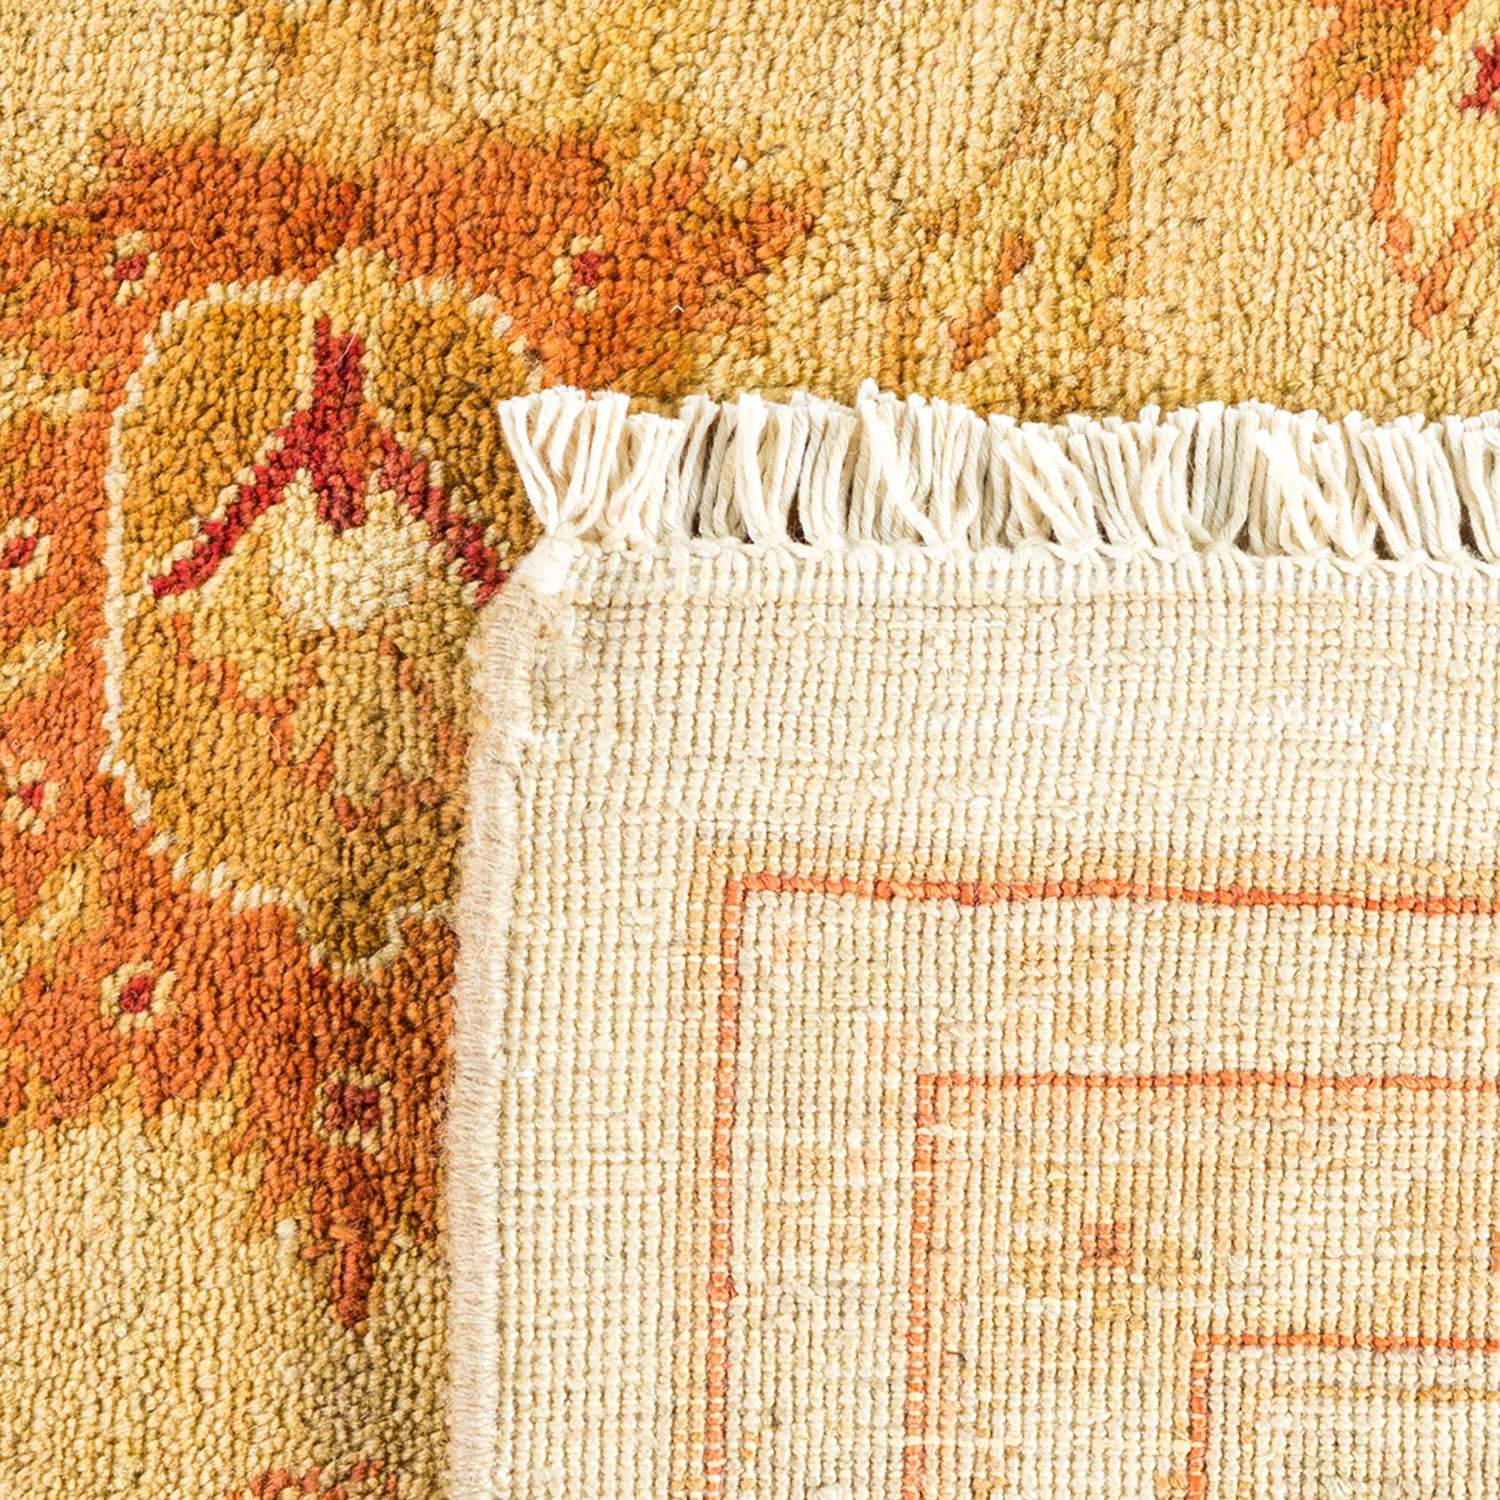 Detailed, traditional handwoven rug with fringe and intricate weave pattern.